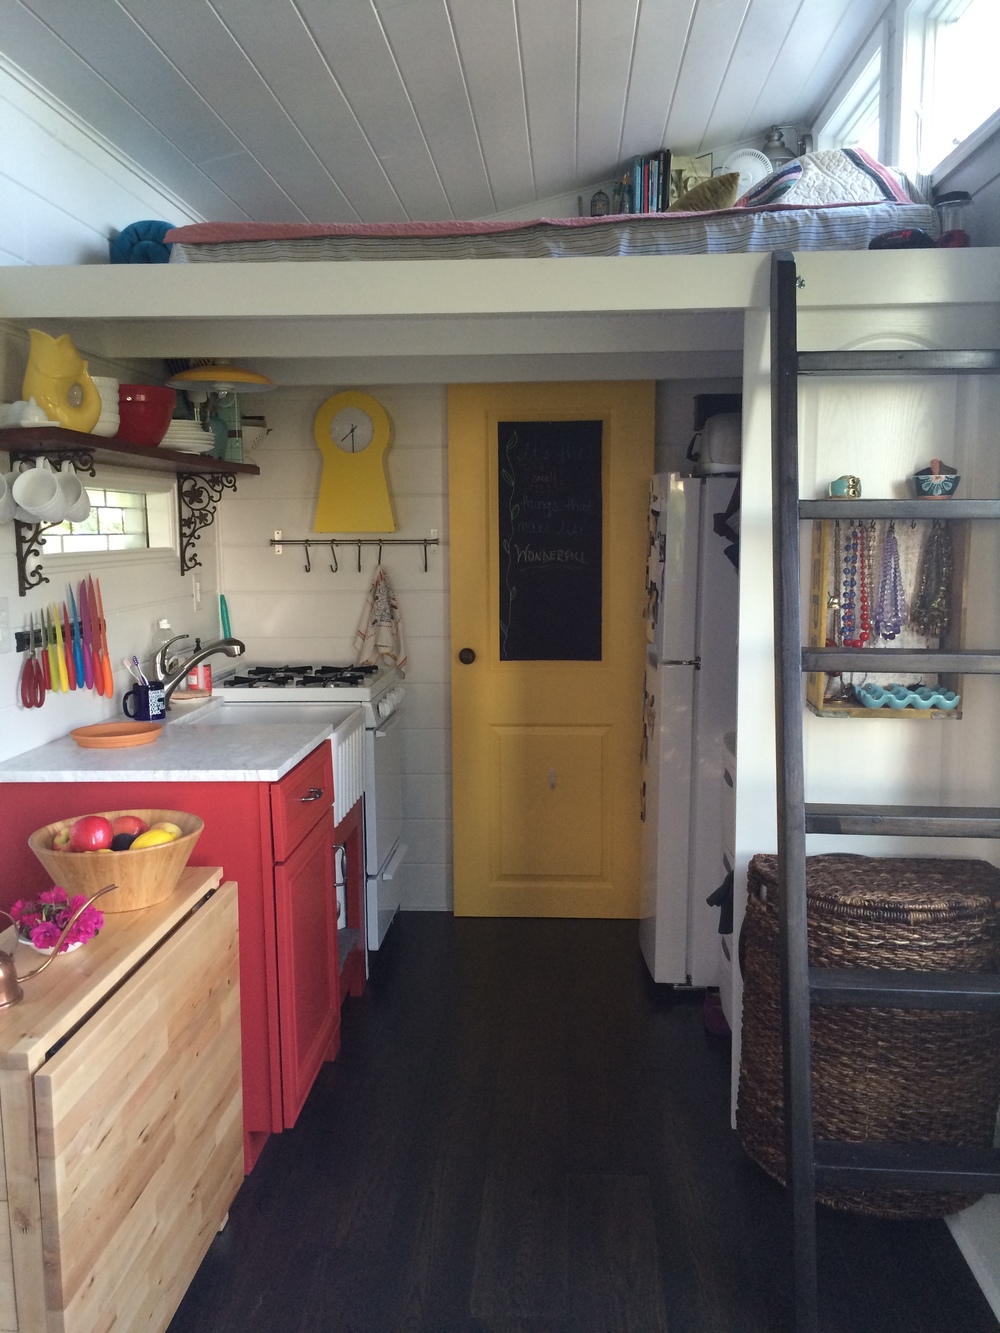  The kitchen area is to the left, refrigerator and closet on the right behind the ladder, sleeping loft on top, and bathroom through the yellow door in the back. 